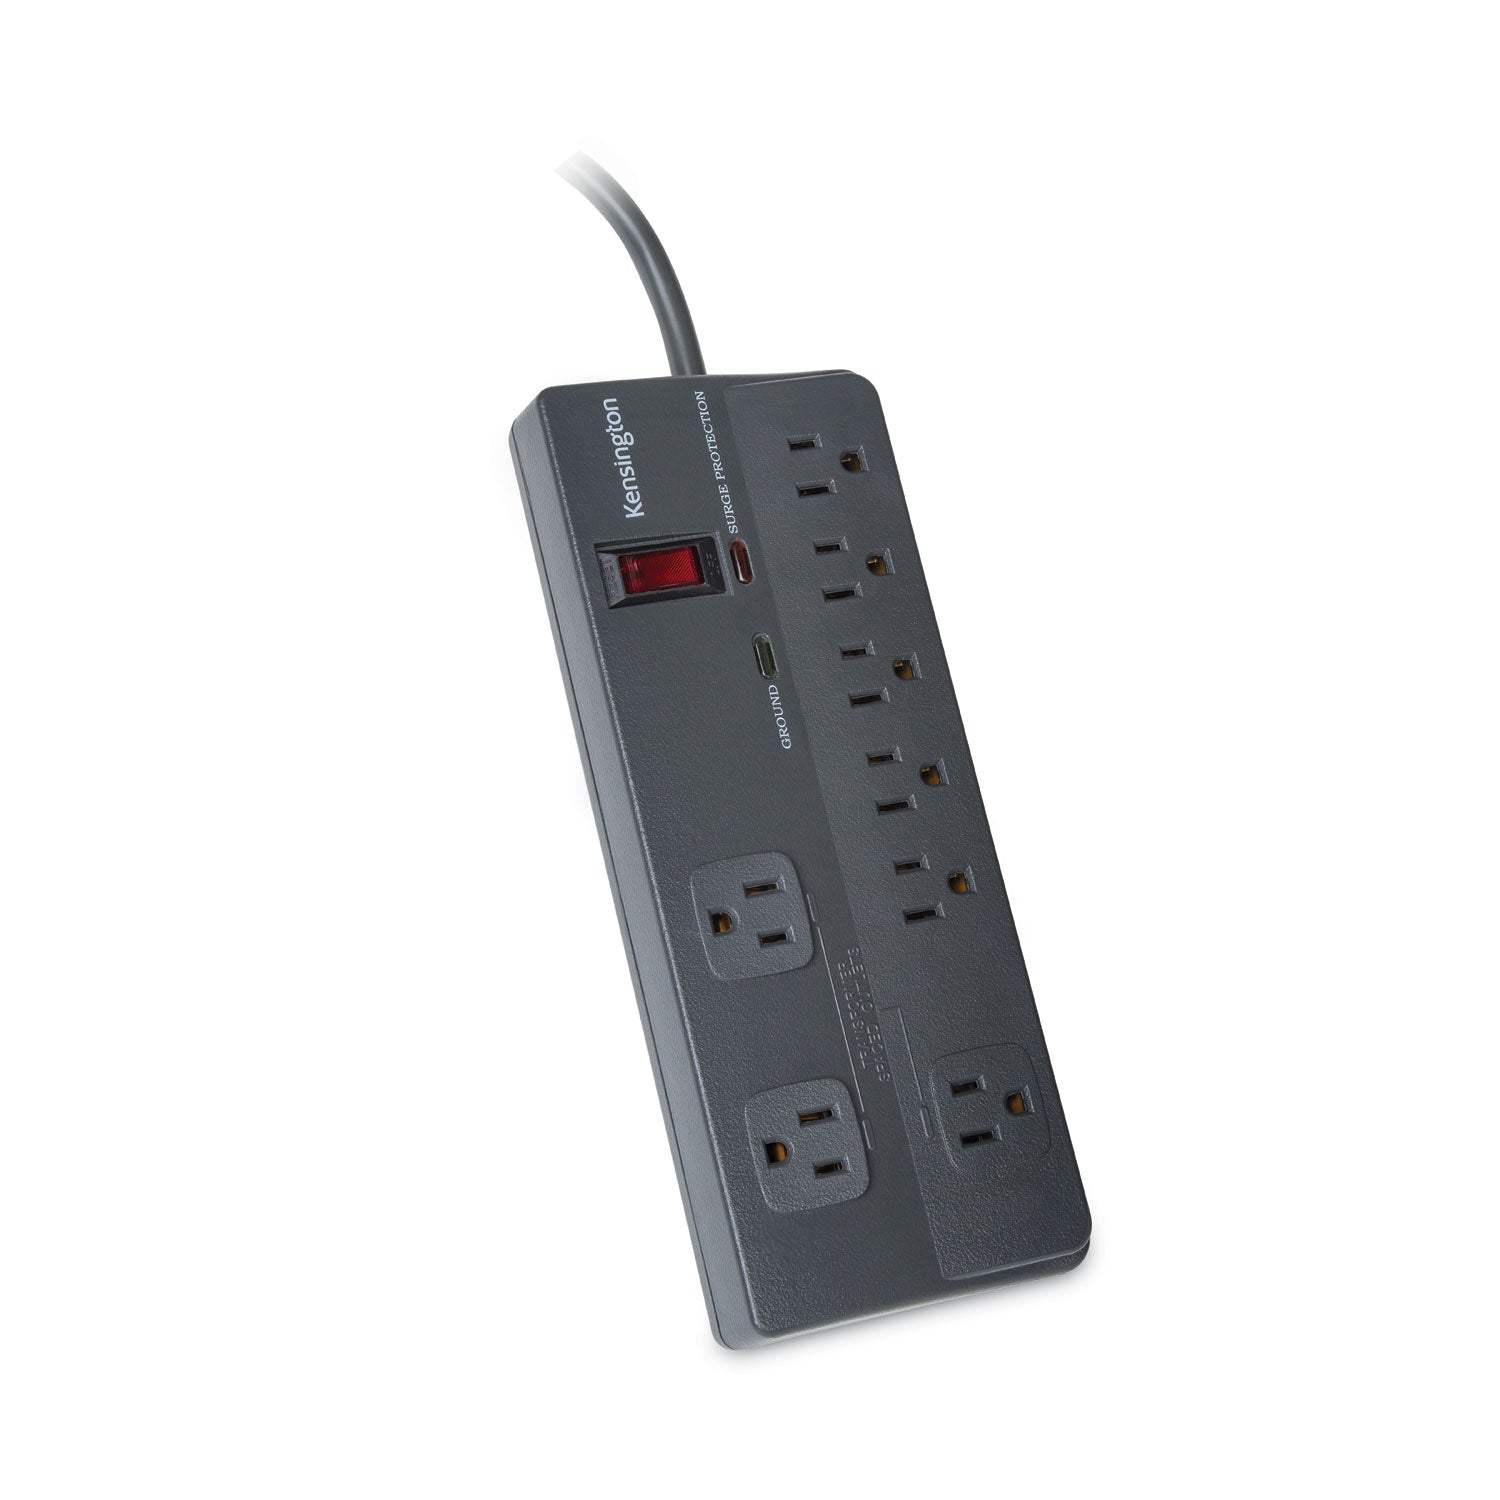 Guardian Premium Surge Protector, 8 AC Outlets, 6 ft Cord, 1,080 J, Gray - 